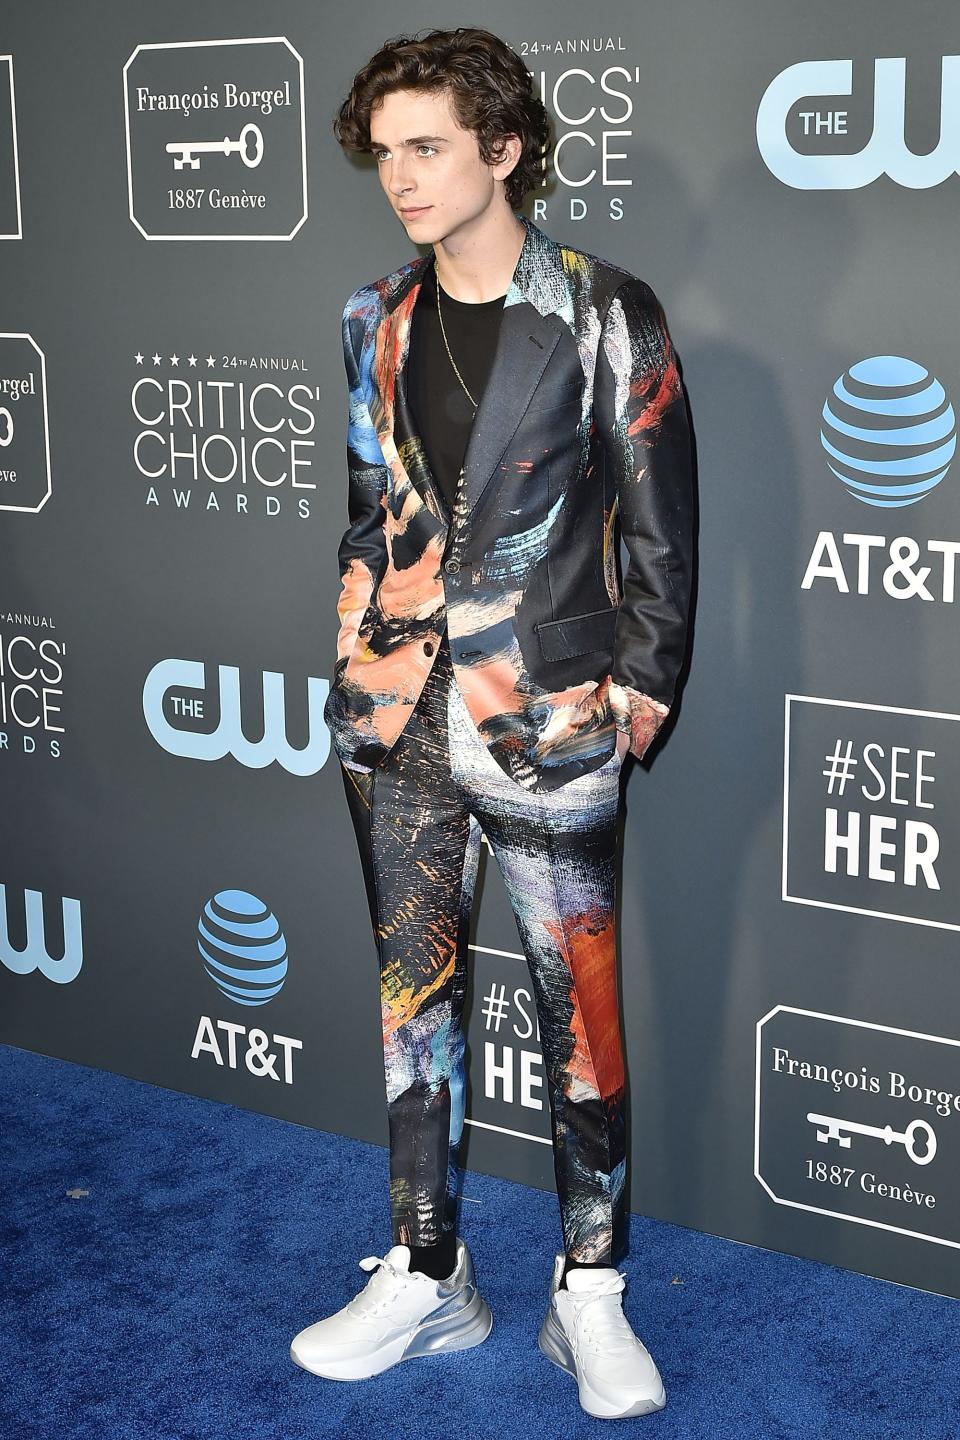 Timothee Chalamet attends the 24th Annual Critics' Choice Awards